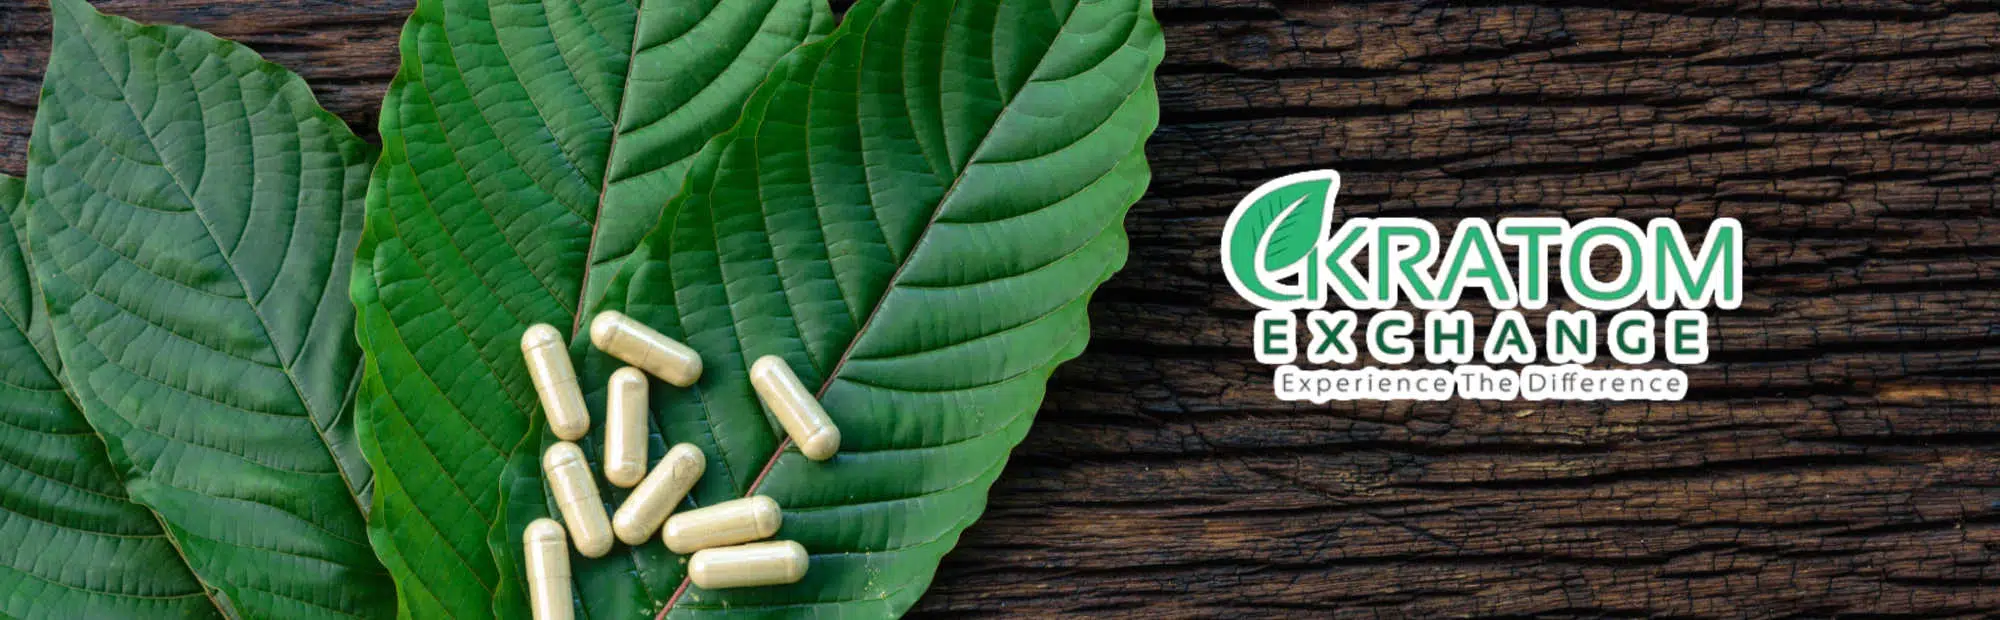 Kratom exchange logo and slogan: experience the difference